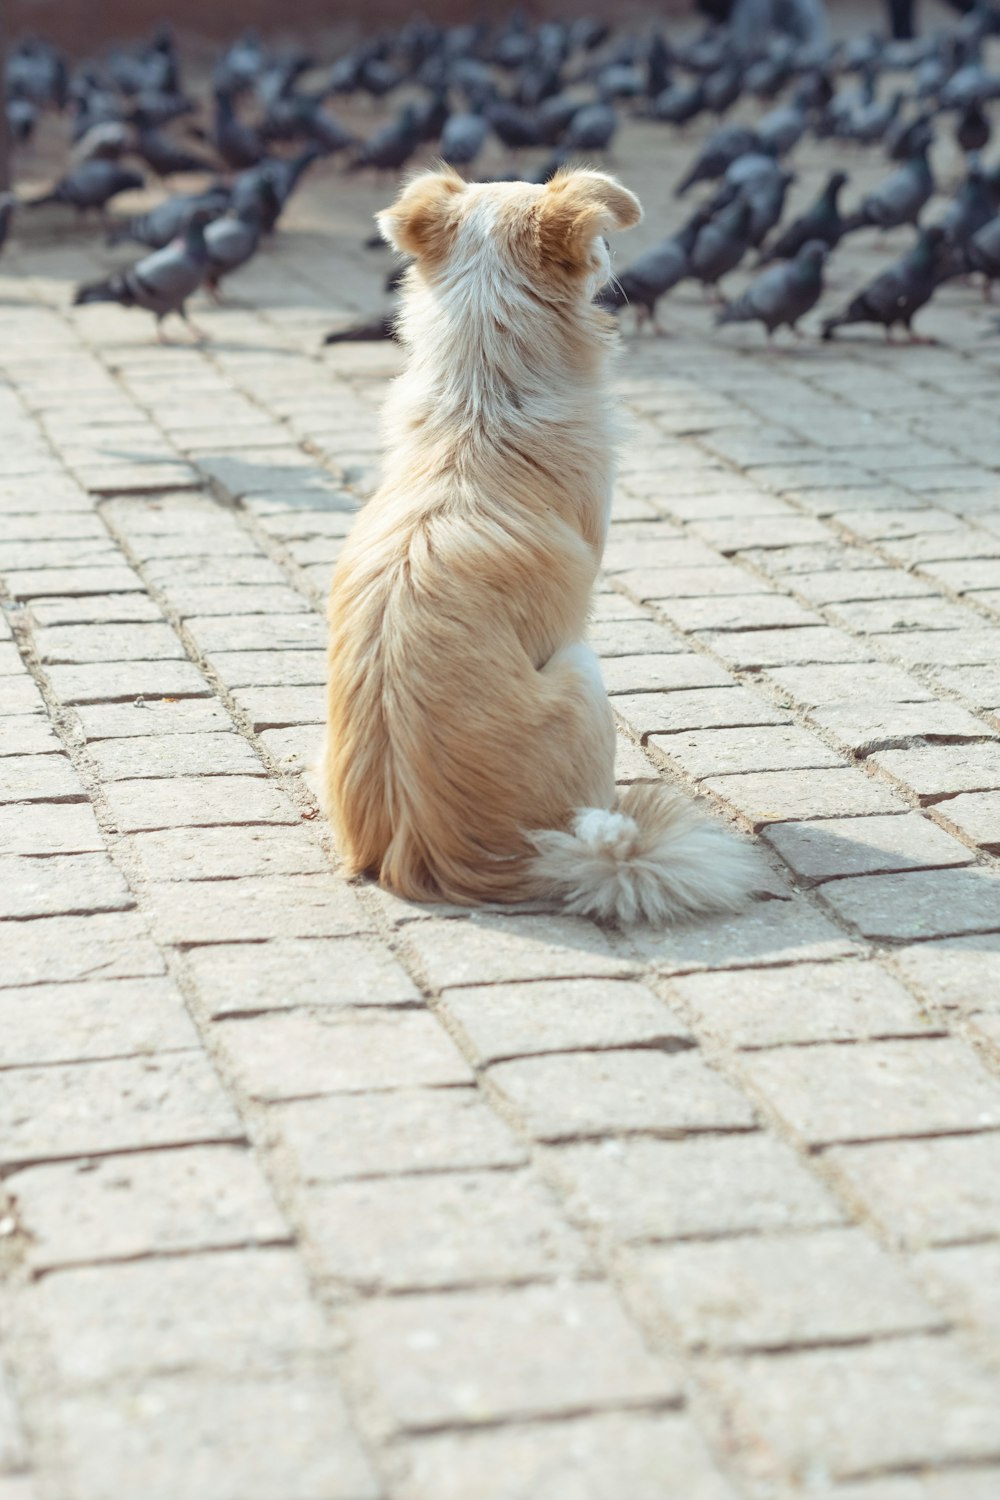 a small dog sitting on a brick walkway surrounded by pigeons